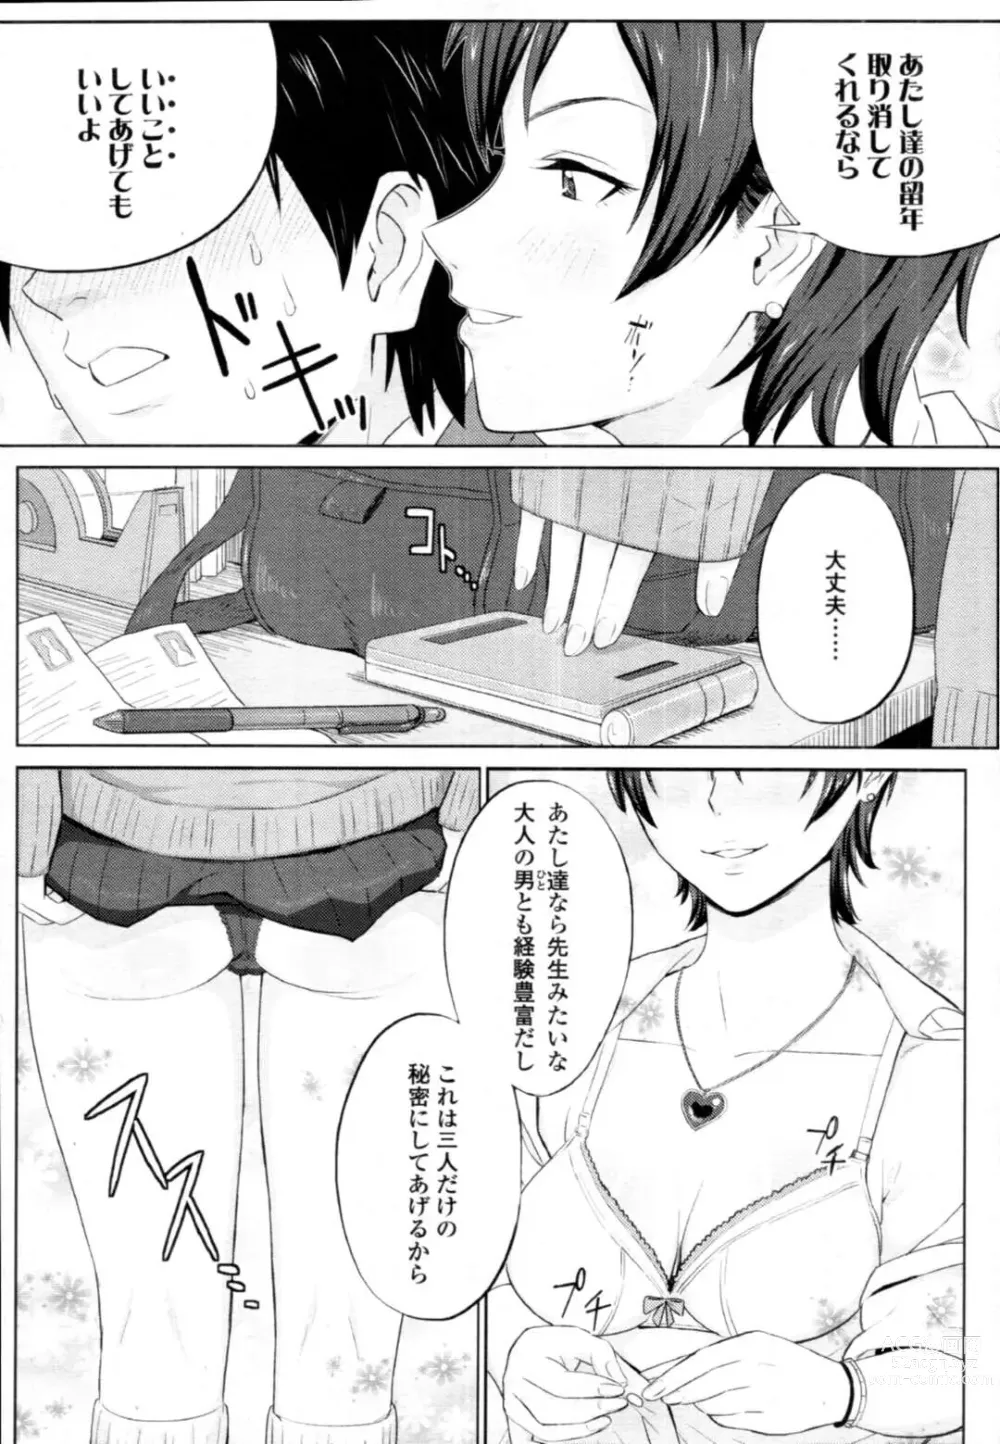 Page 5 of doujinshi Sassy Gal JKs Having Harem Sex with Teachers... Lewd Girls Climax by Letting Him Fuck Them Vaginally and Anally!